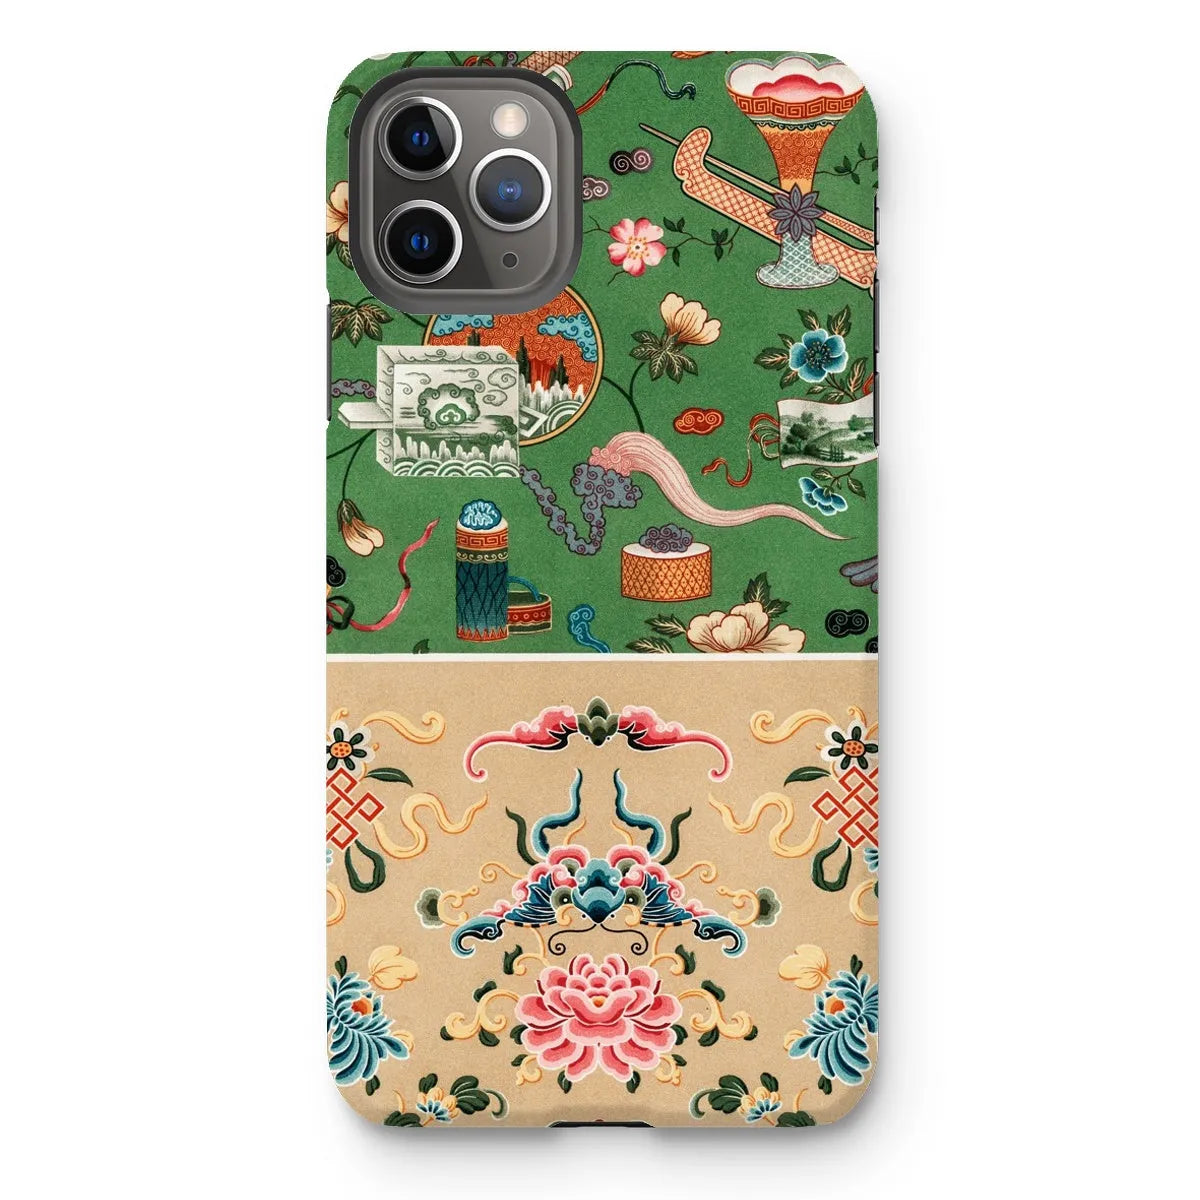 This Chinese Pattern By Auguste Racinet Tough Phone Case - Iphone 11 Pro Max / Matte - Mobile Phone Cases - Aesthetic